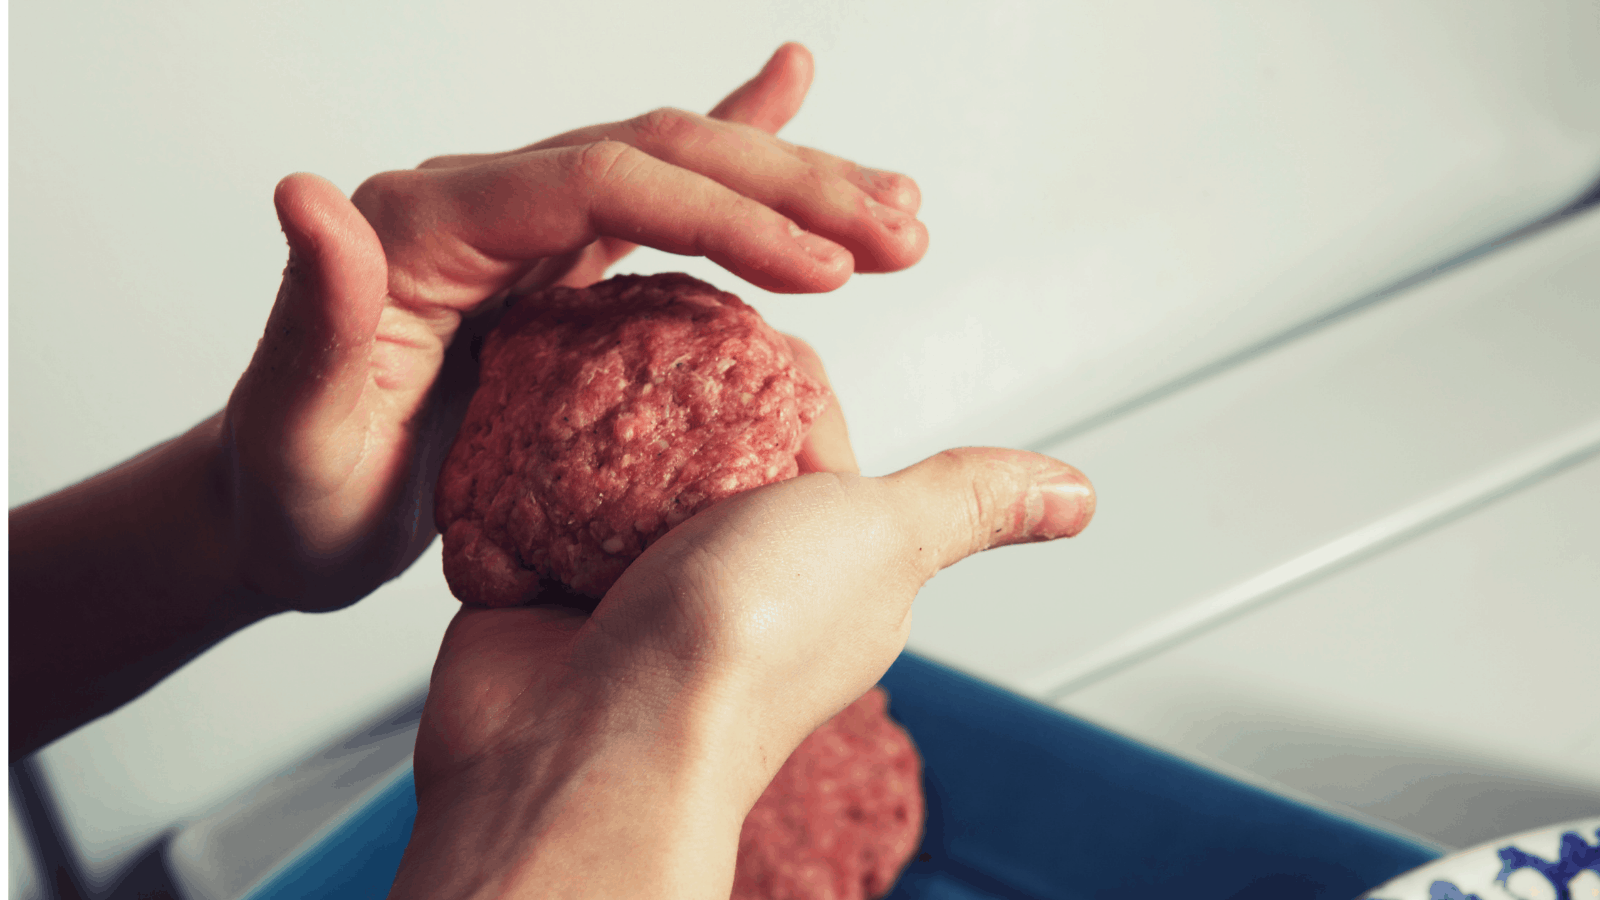 hands forming ground beef into burger